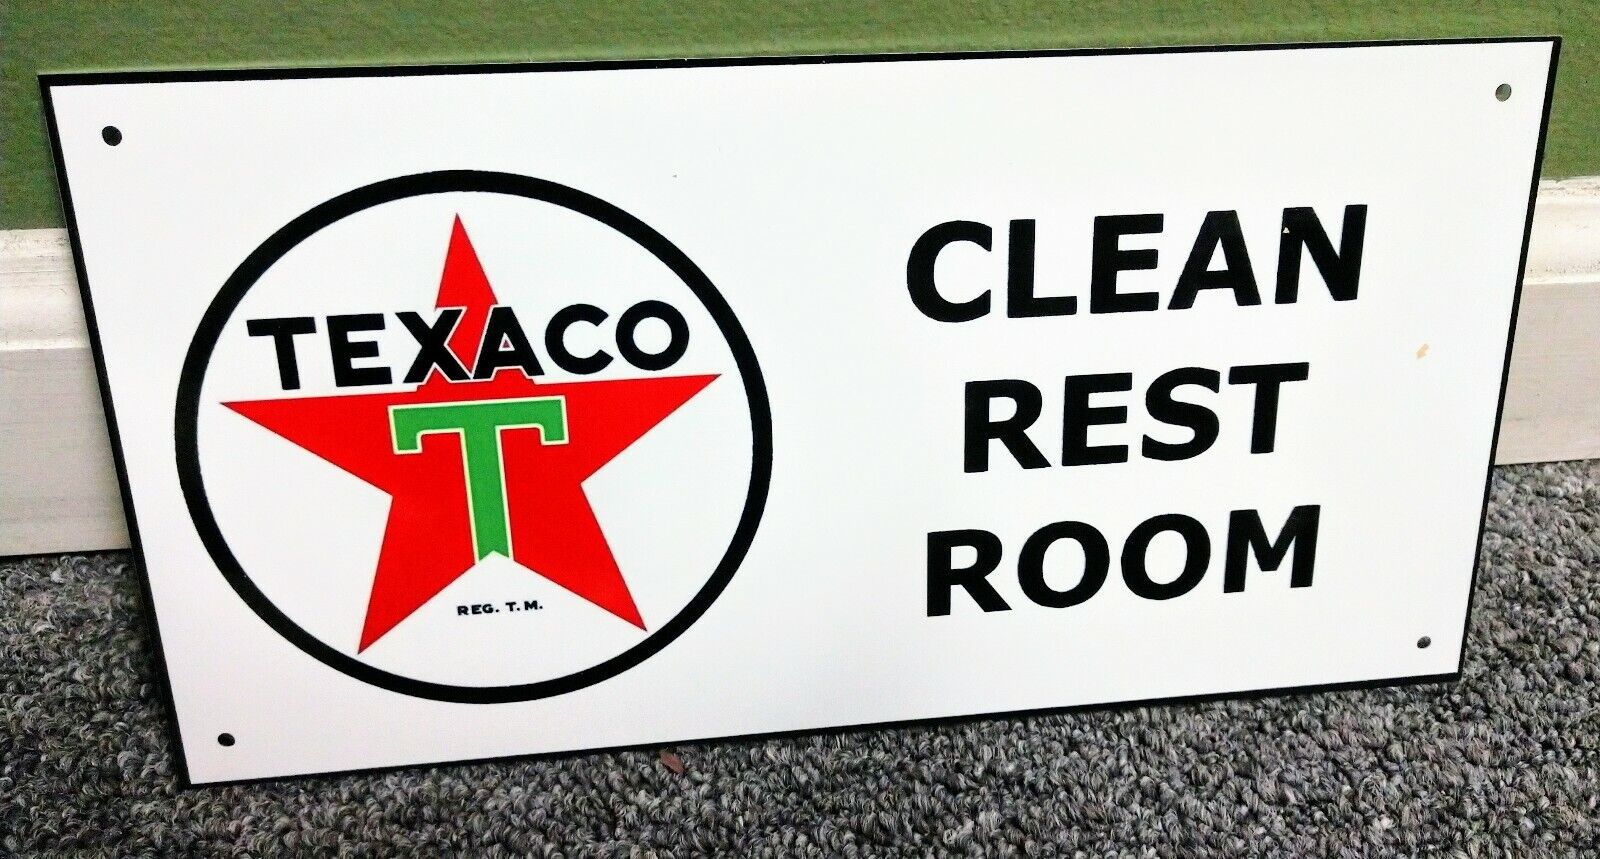 Texaco Clean Rest Room Gas Oil gasoline Sign...FREE shipping on 10 signs